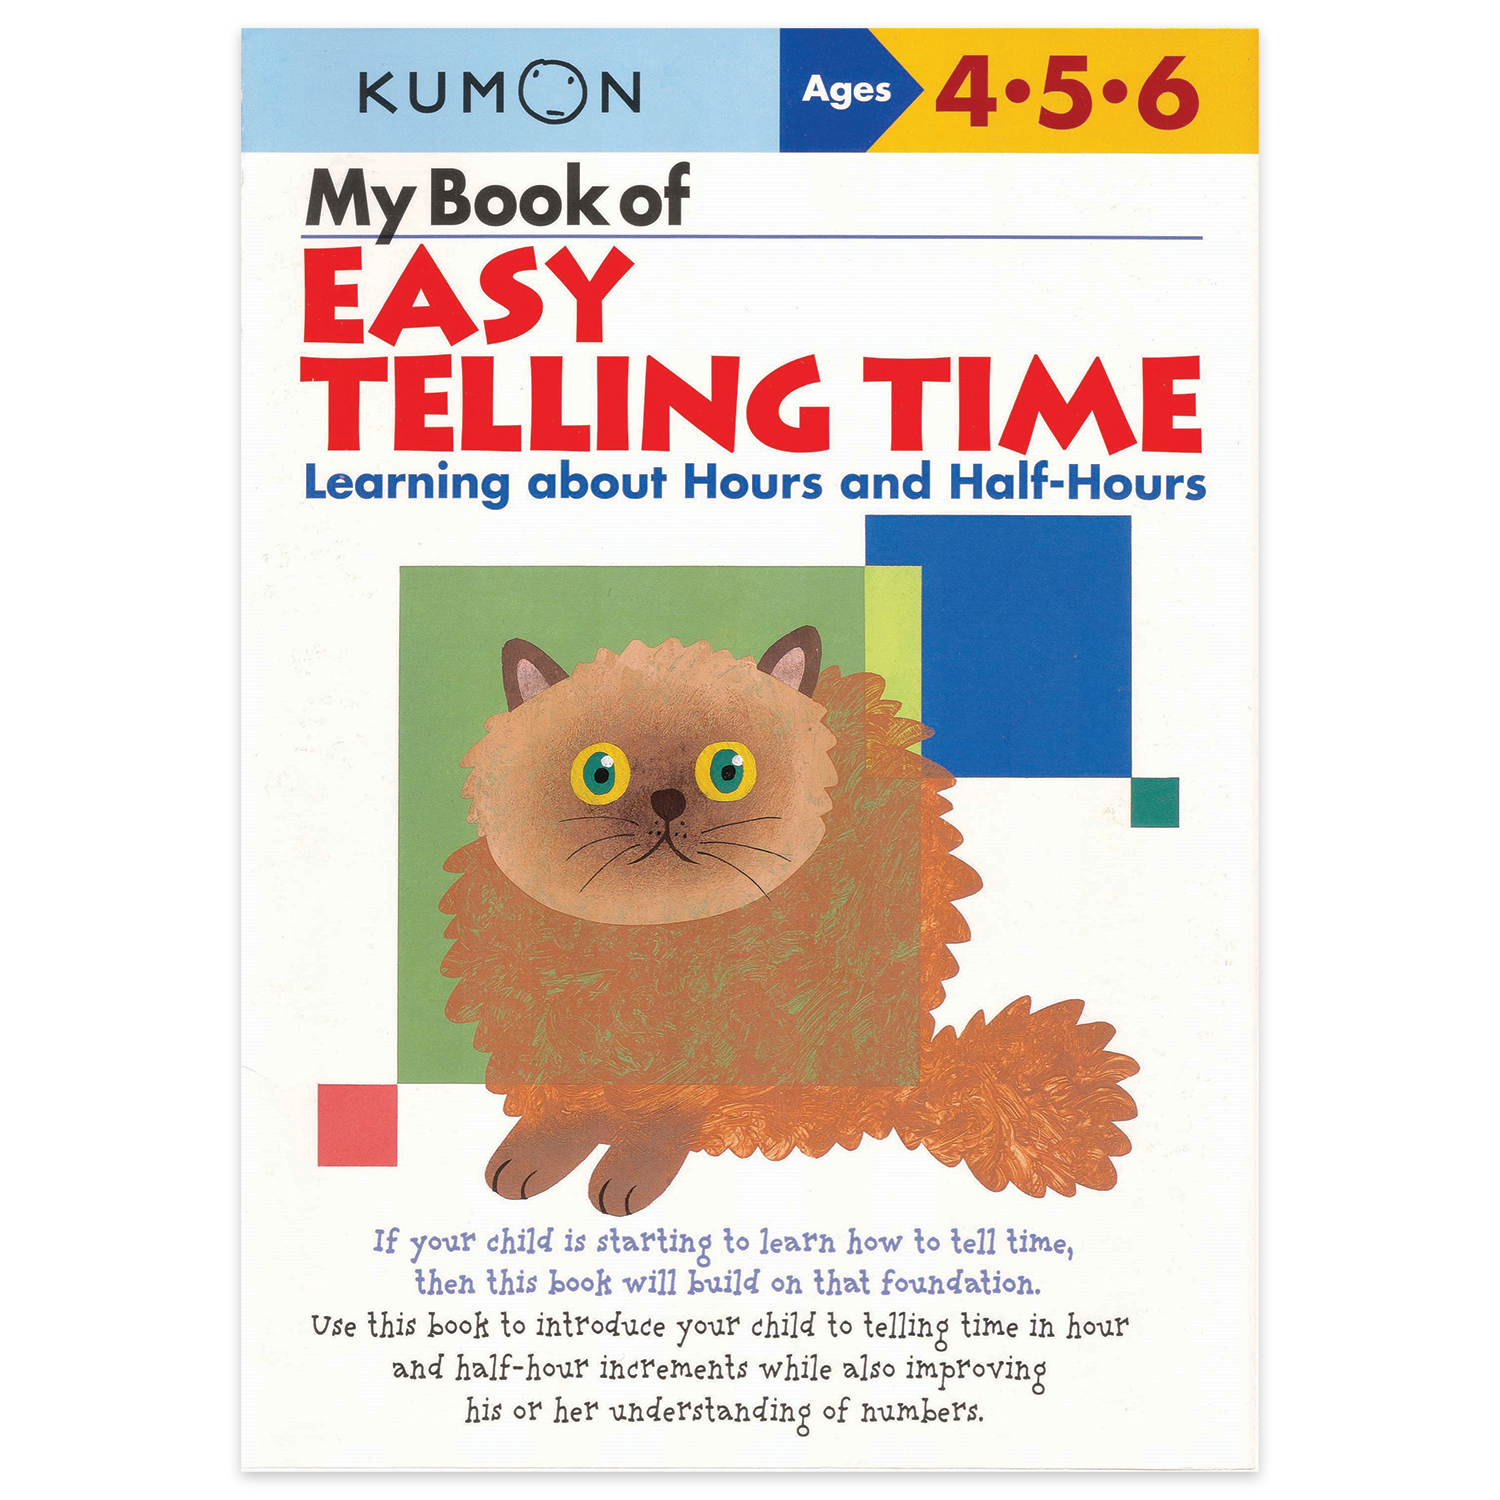 my book of easy telling time - hours + 1/2 hours